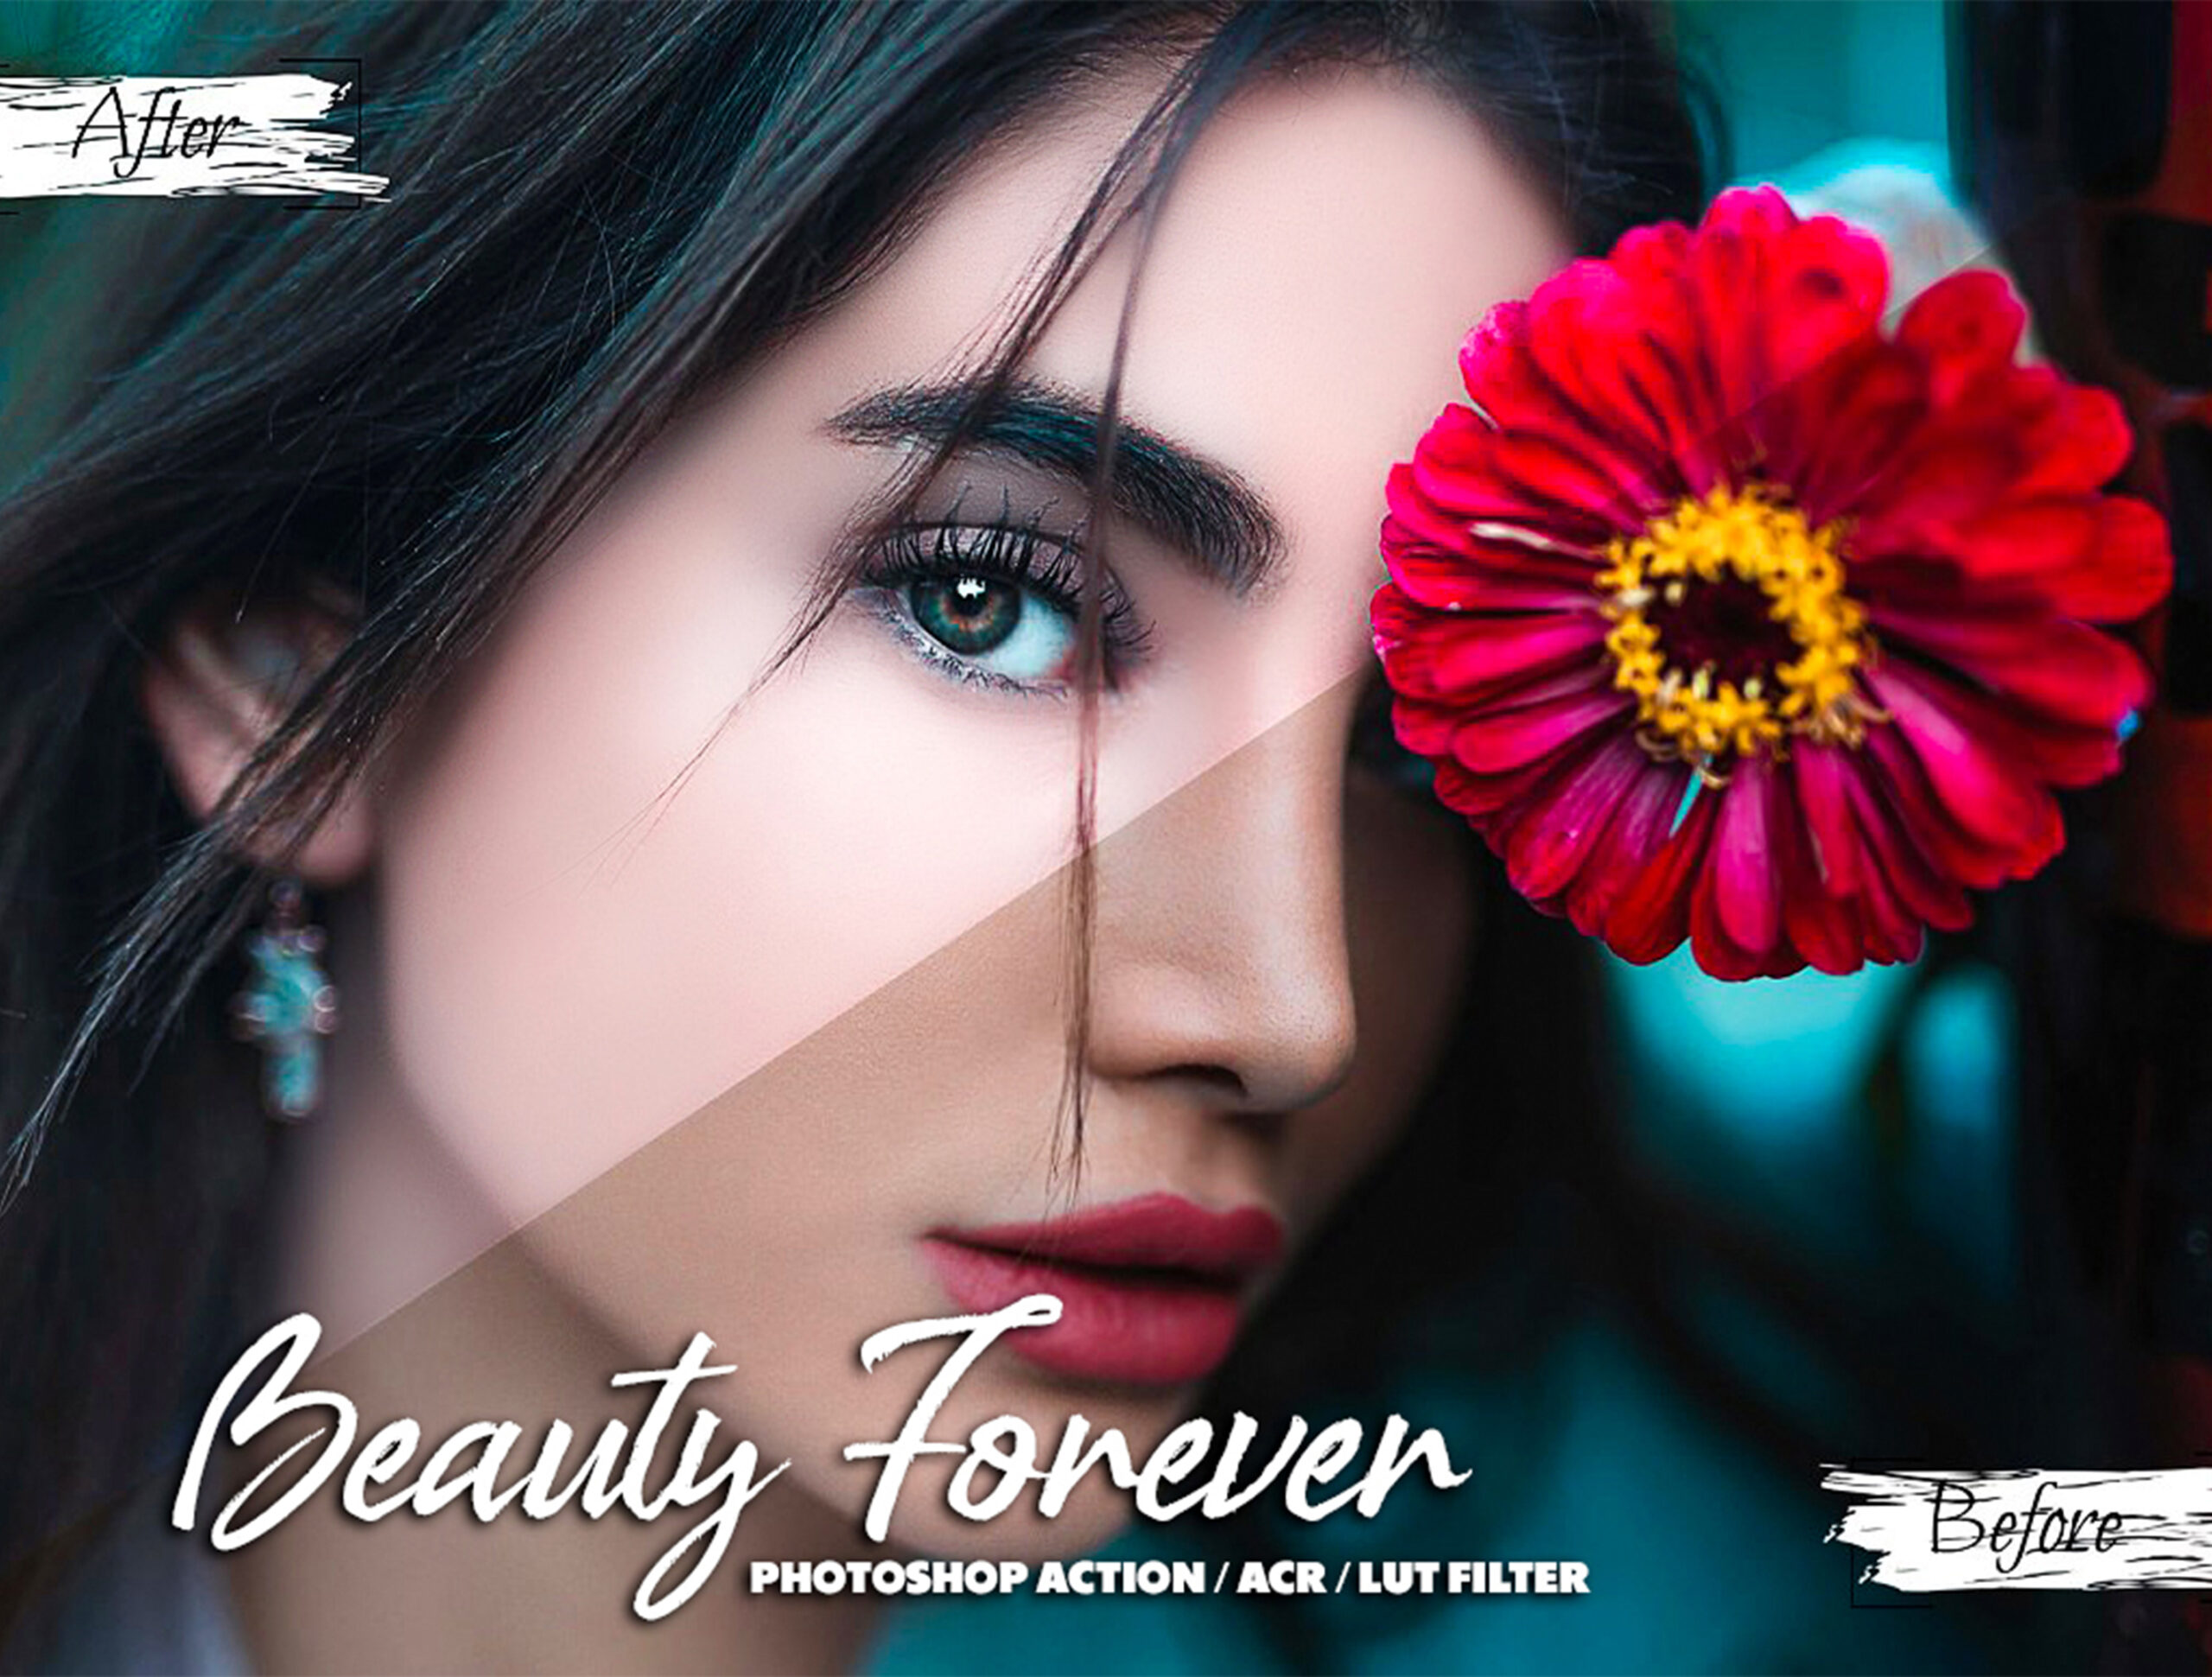 27 Beauty Forever Ps,CR, Lut Filter [Free Download]